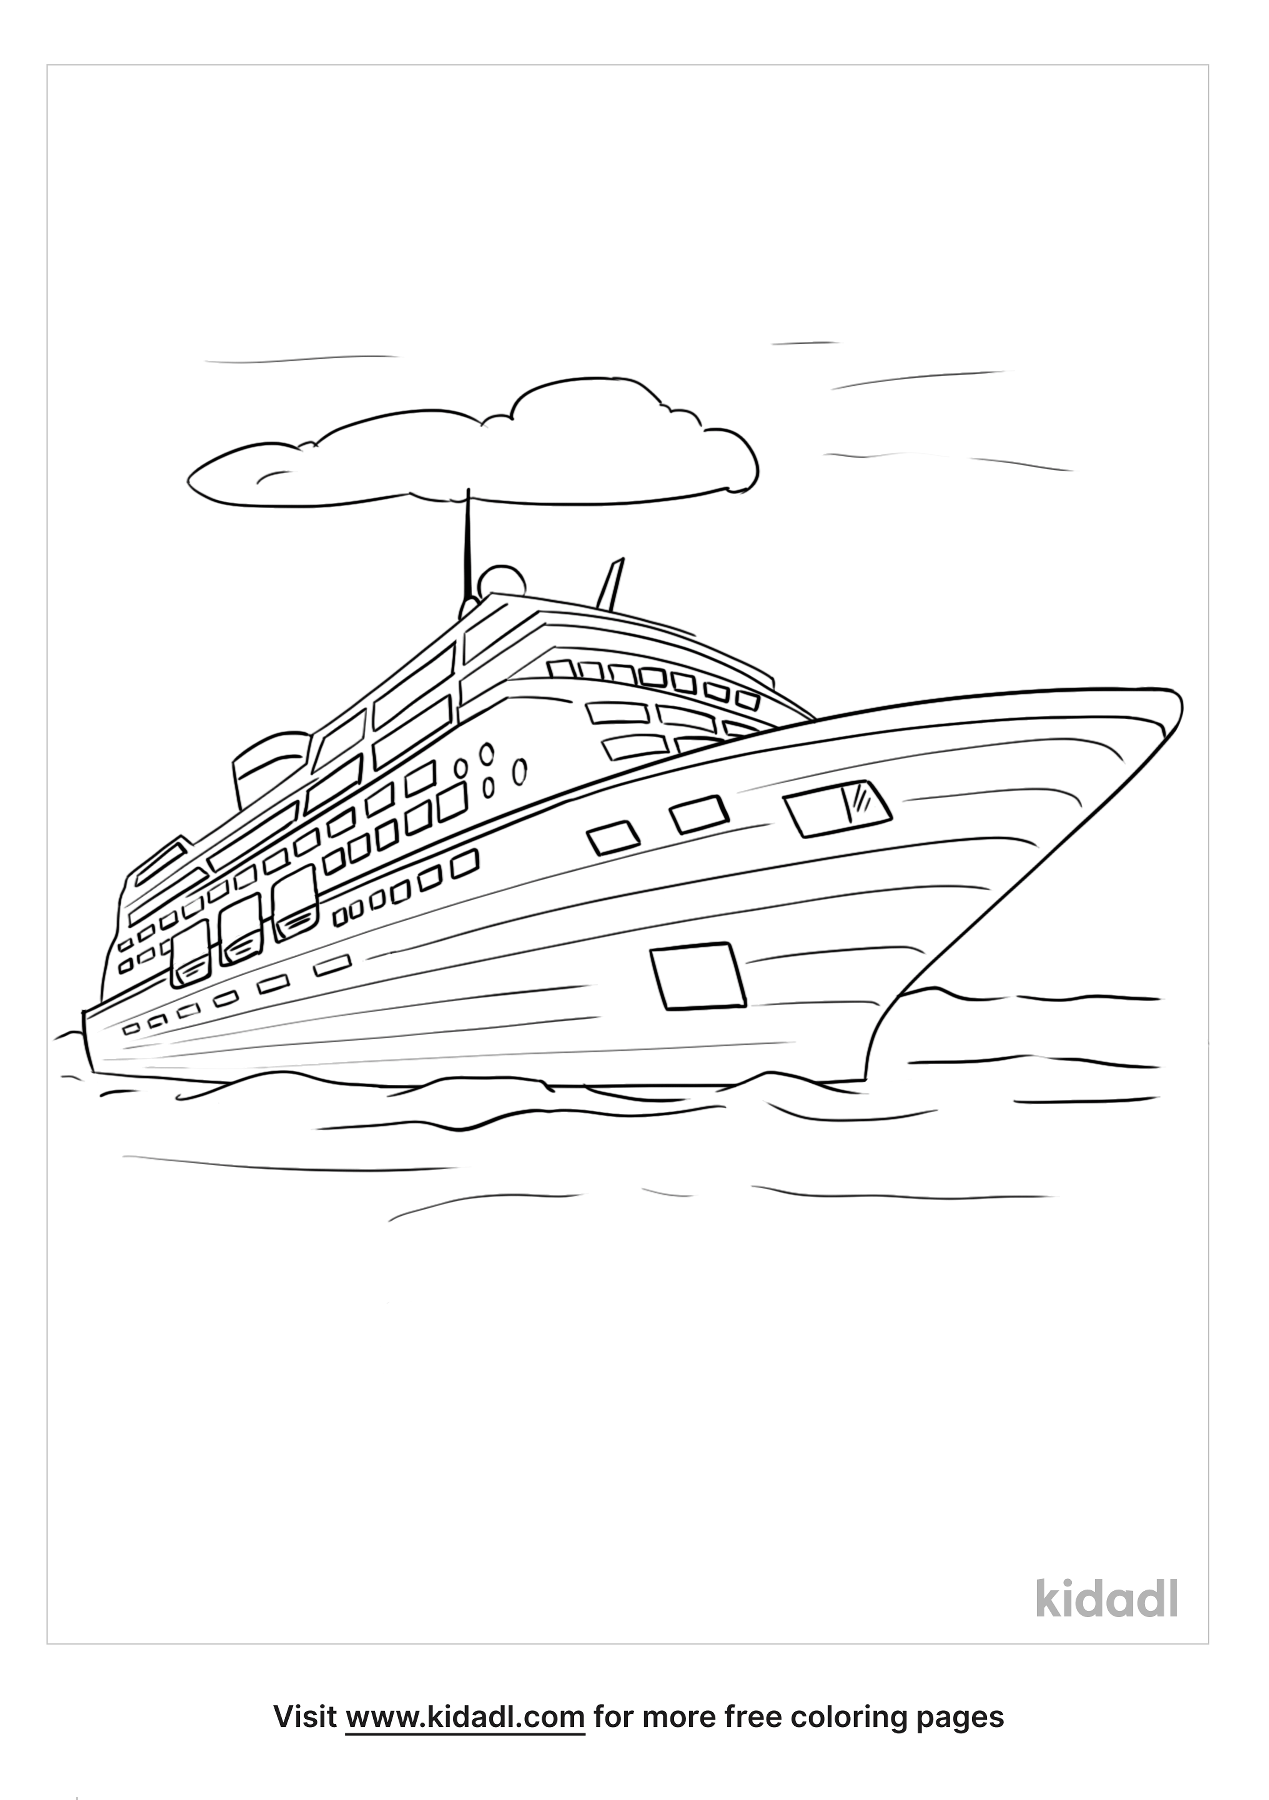 Carnival Cruise Coloring Page